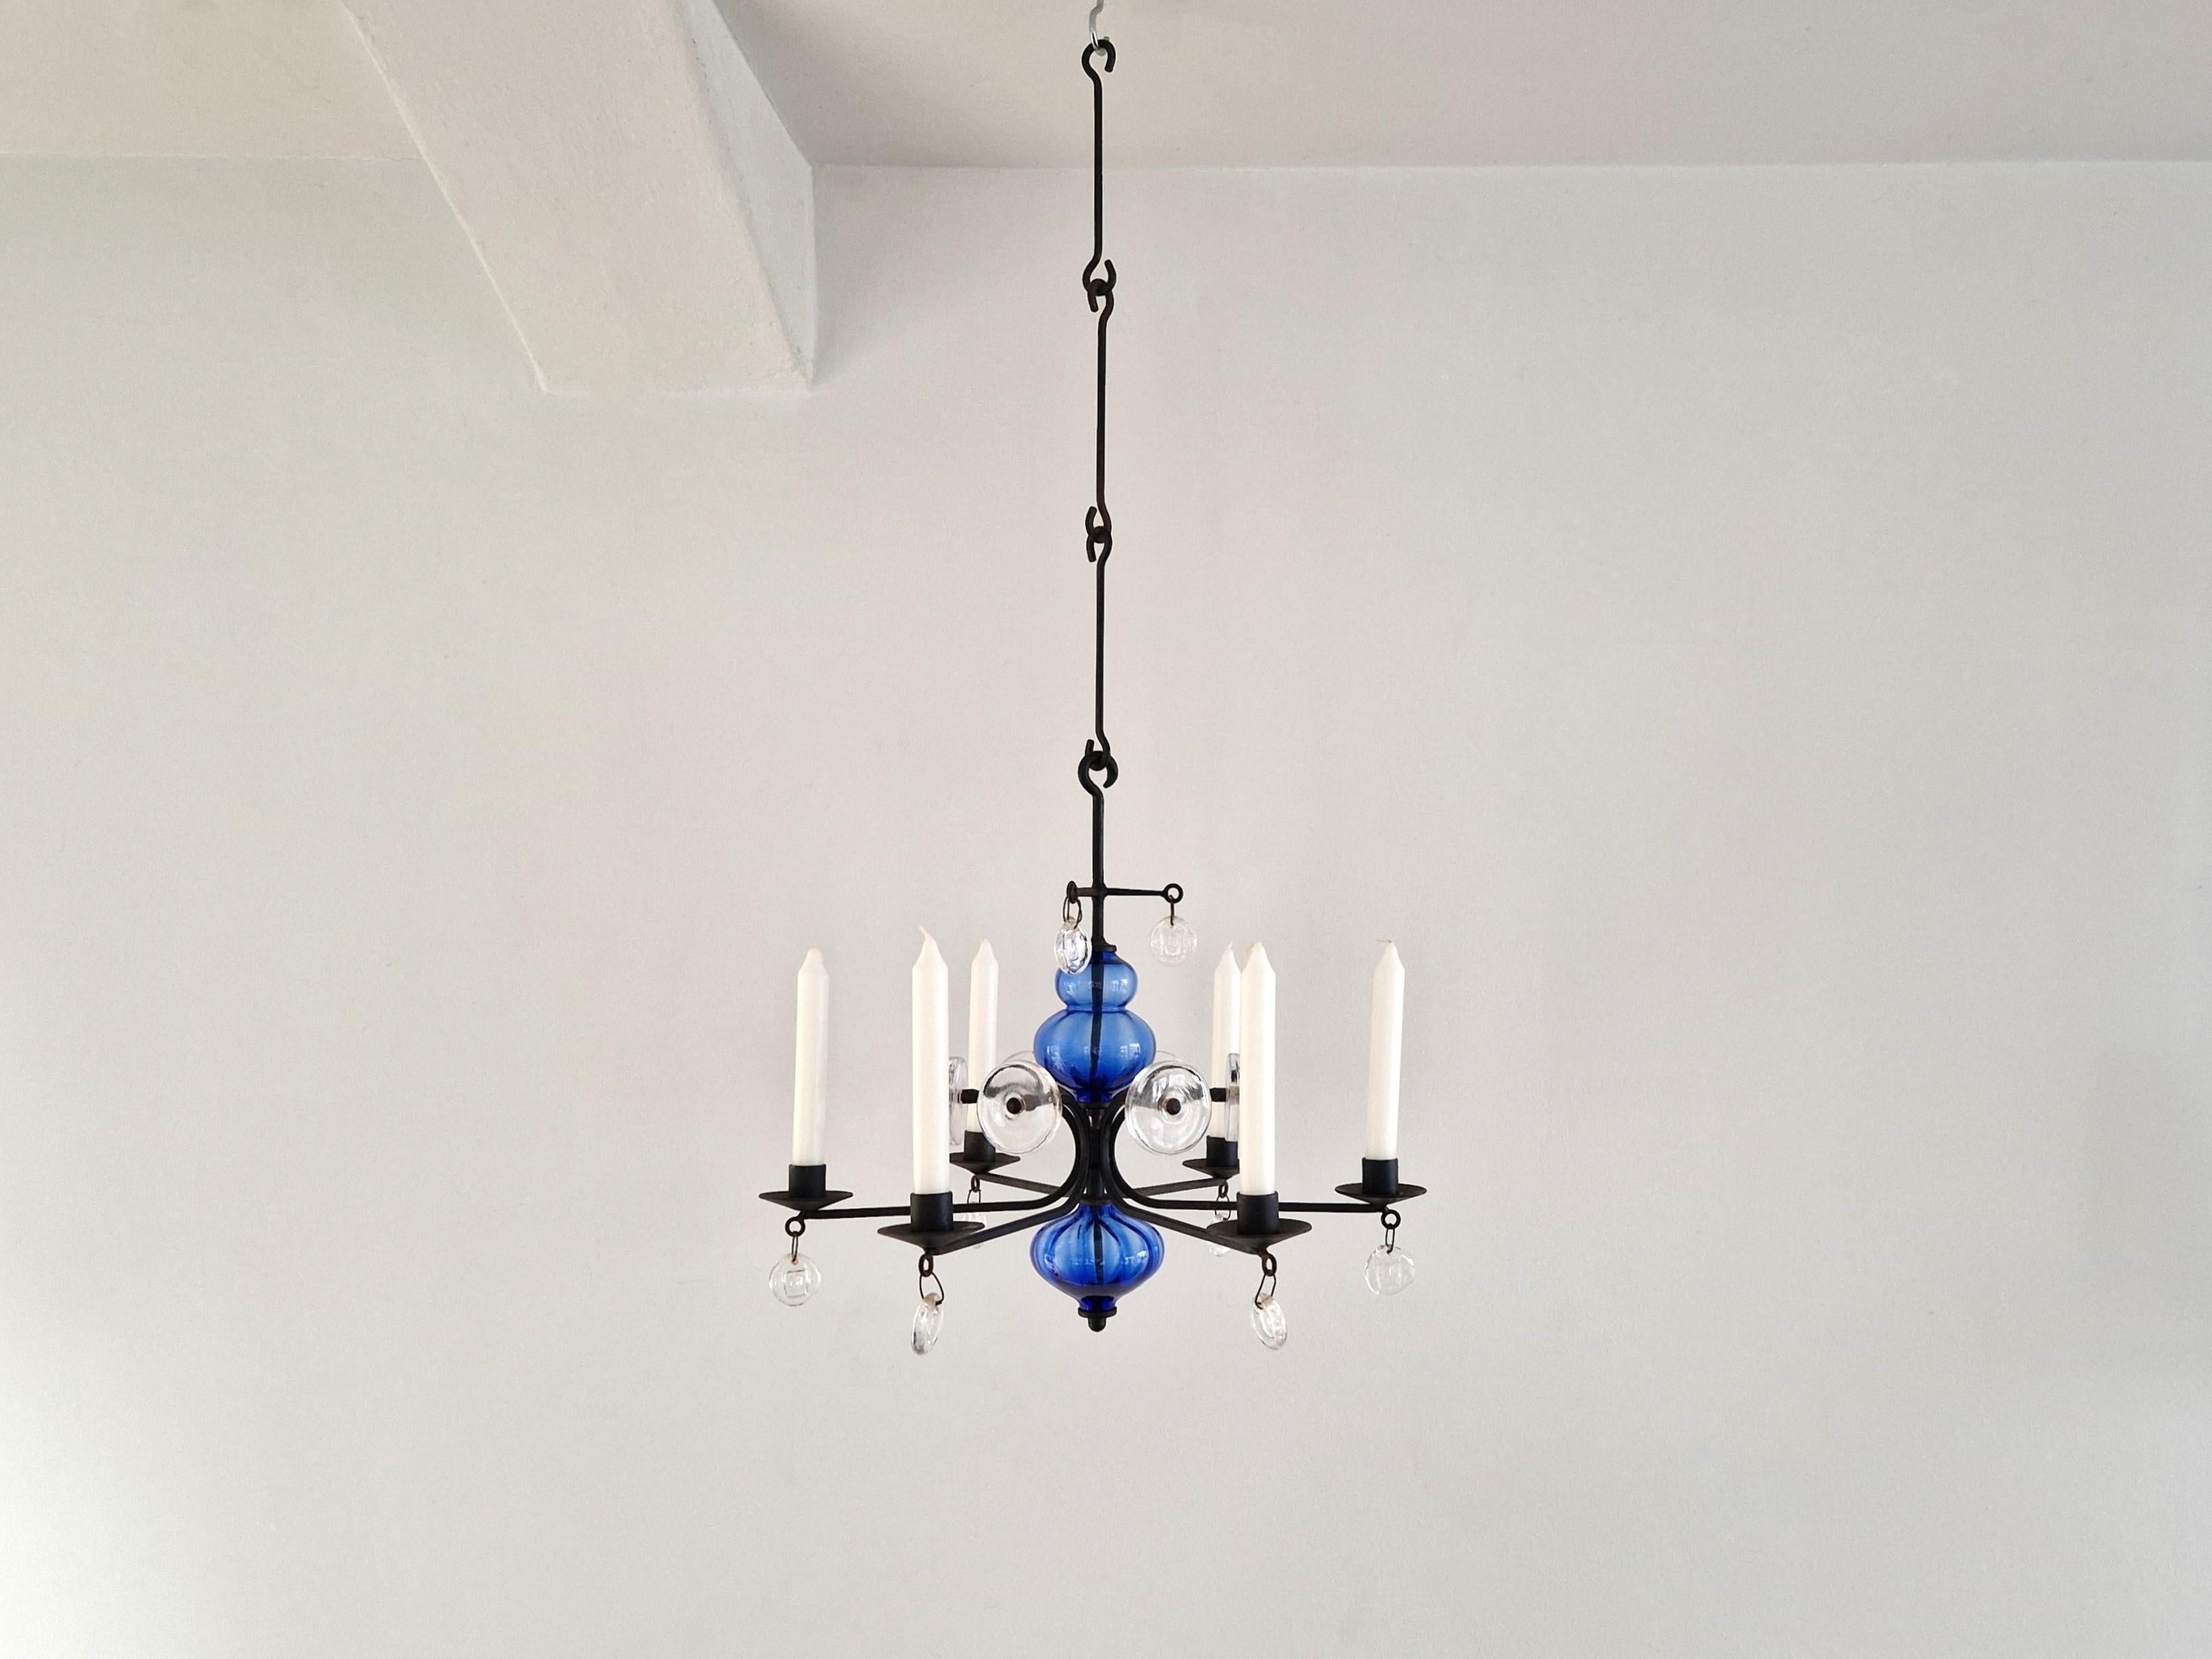 This beautiful blue and clear art glass on wrought iron candelabra chandelier was designed by Erik Höglund for Boda Glasbruk & Smide. Höglund (1932–1998) was one of the brightest stars of 20th-century Swedish glass design. This 6 arm chandelier is